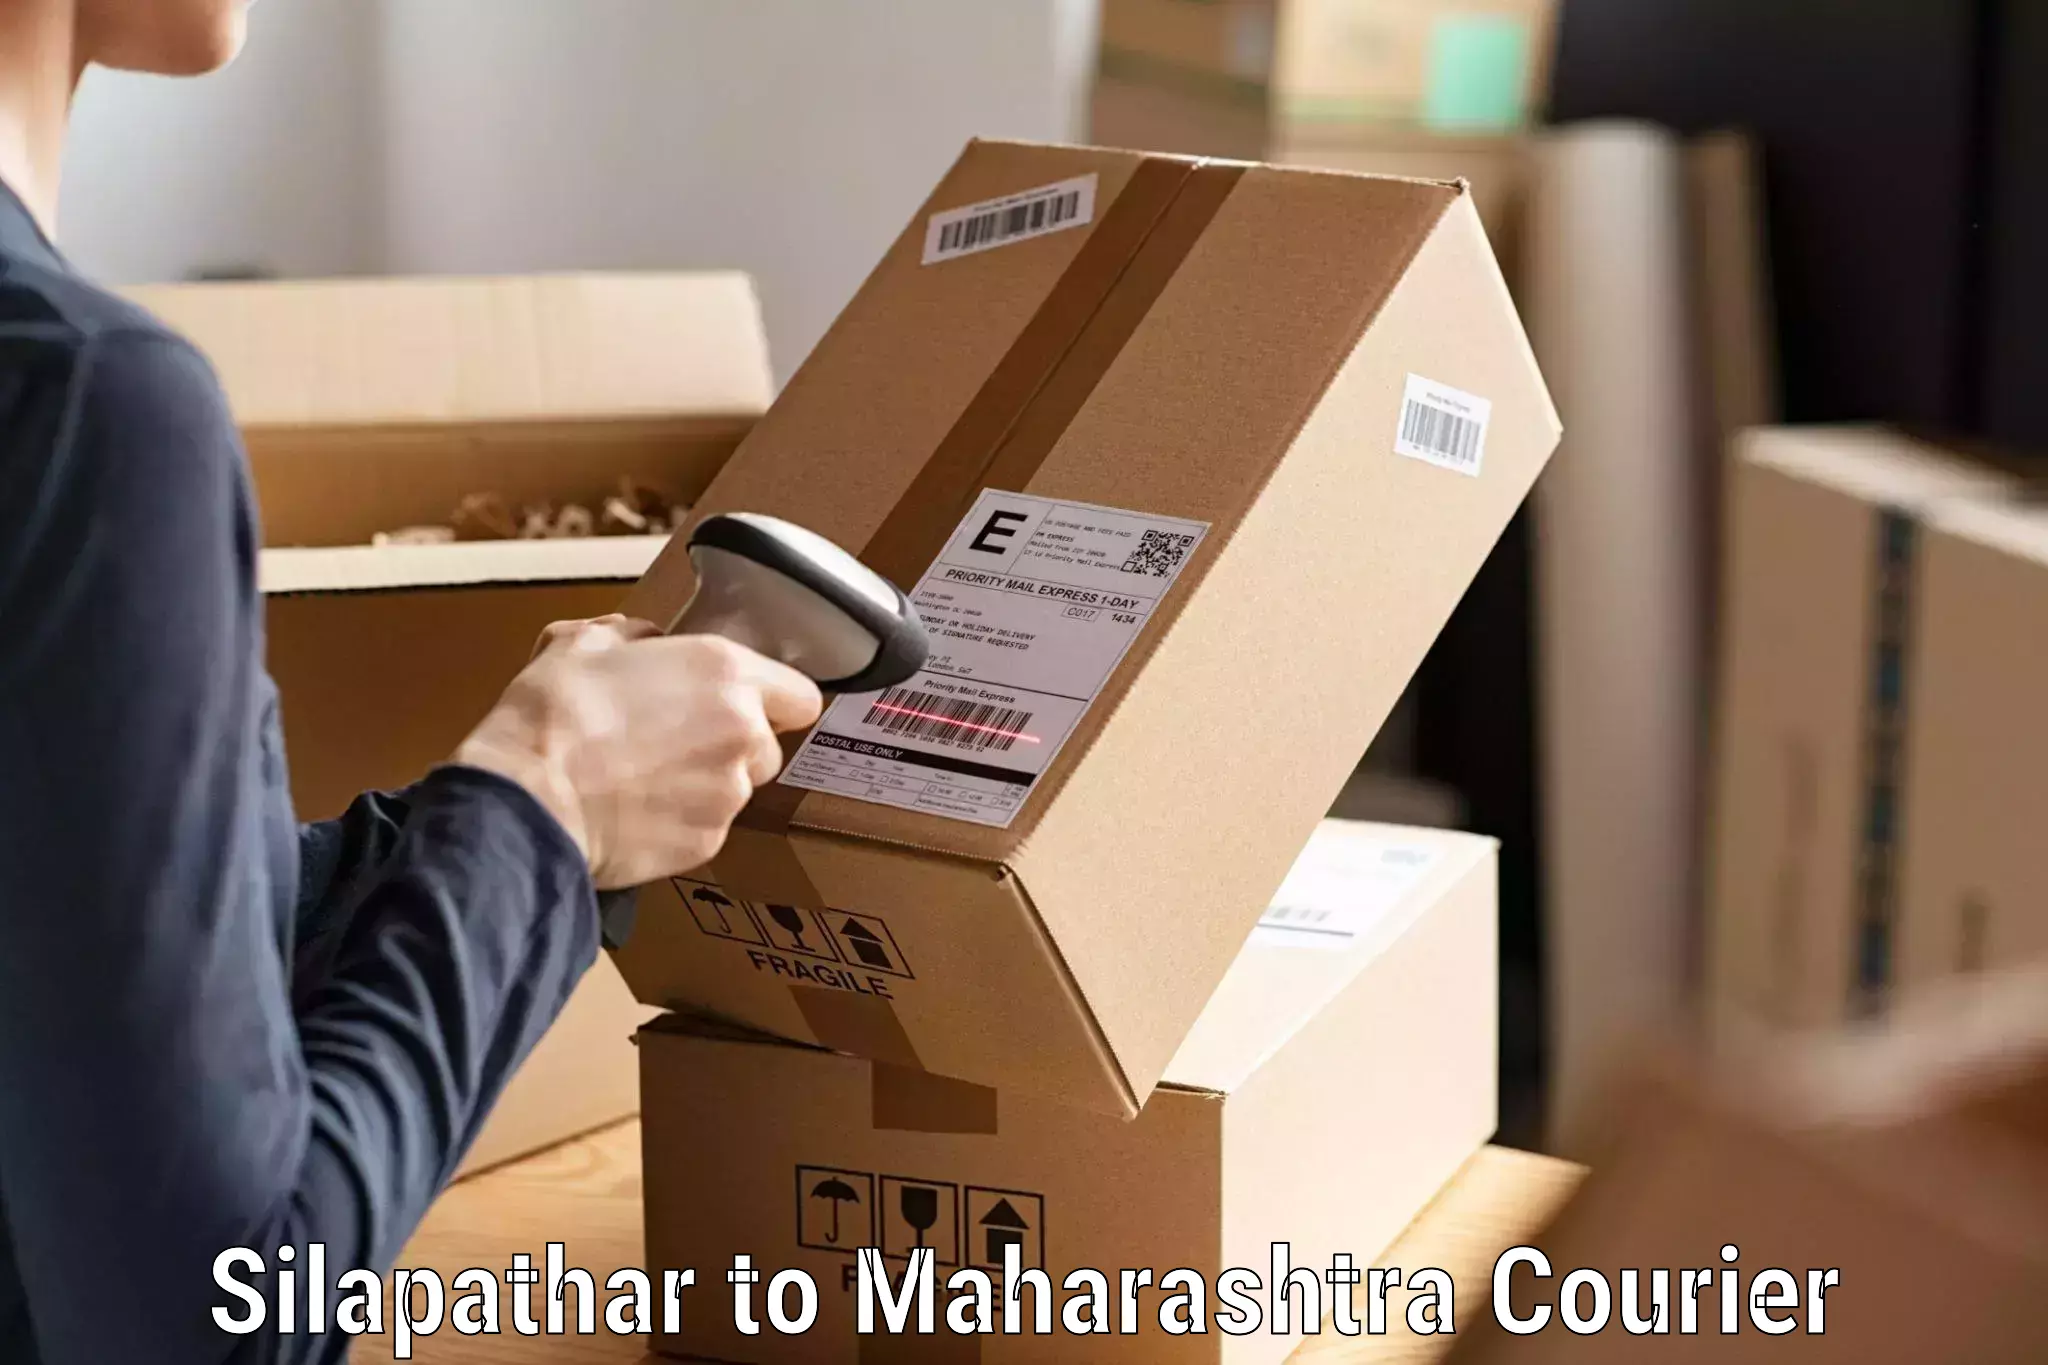 State-of-the-art courier technology Silapathar to Nandura